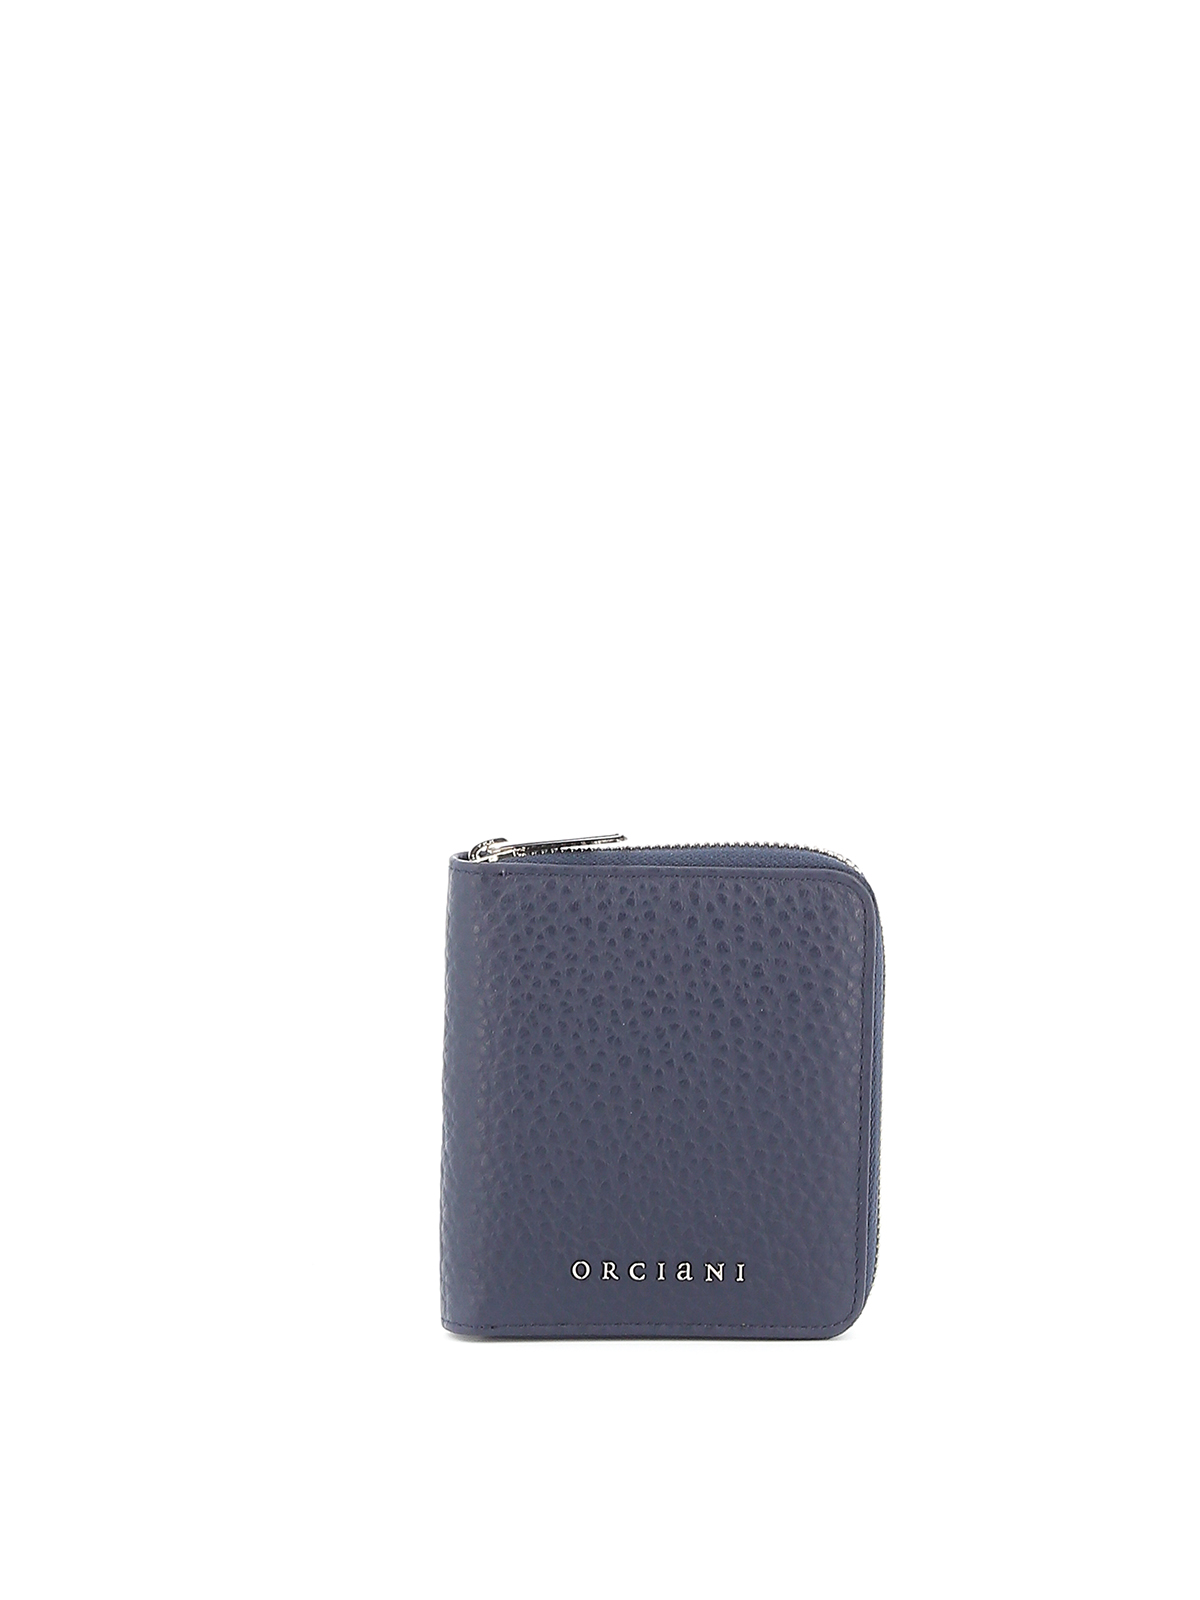 ORCIANI NAVY PEBBLED LEATHER ZIP AROUND WALLET